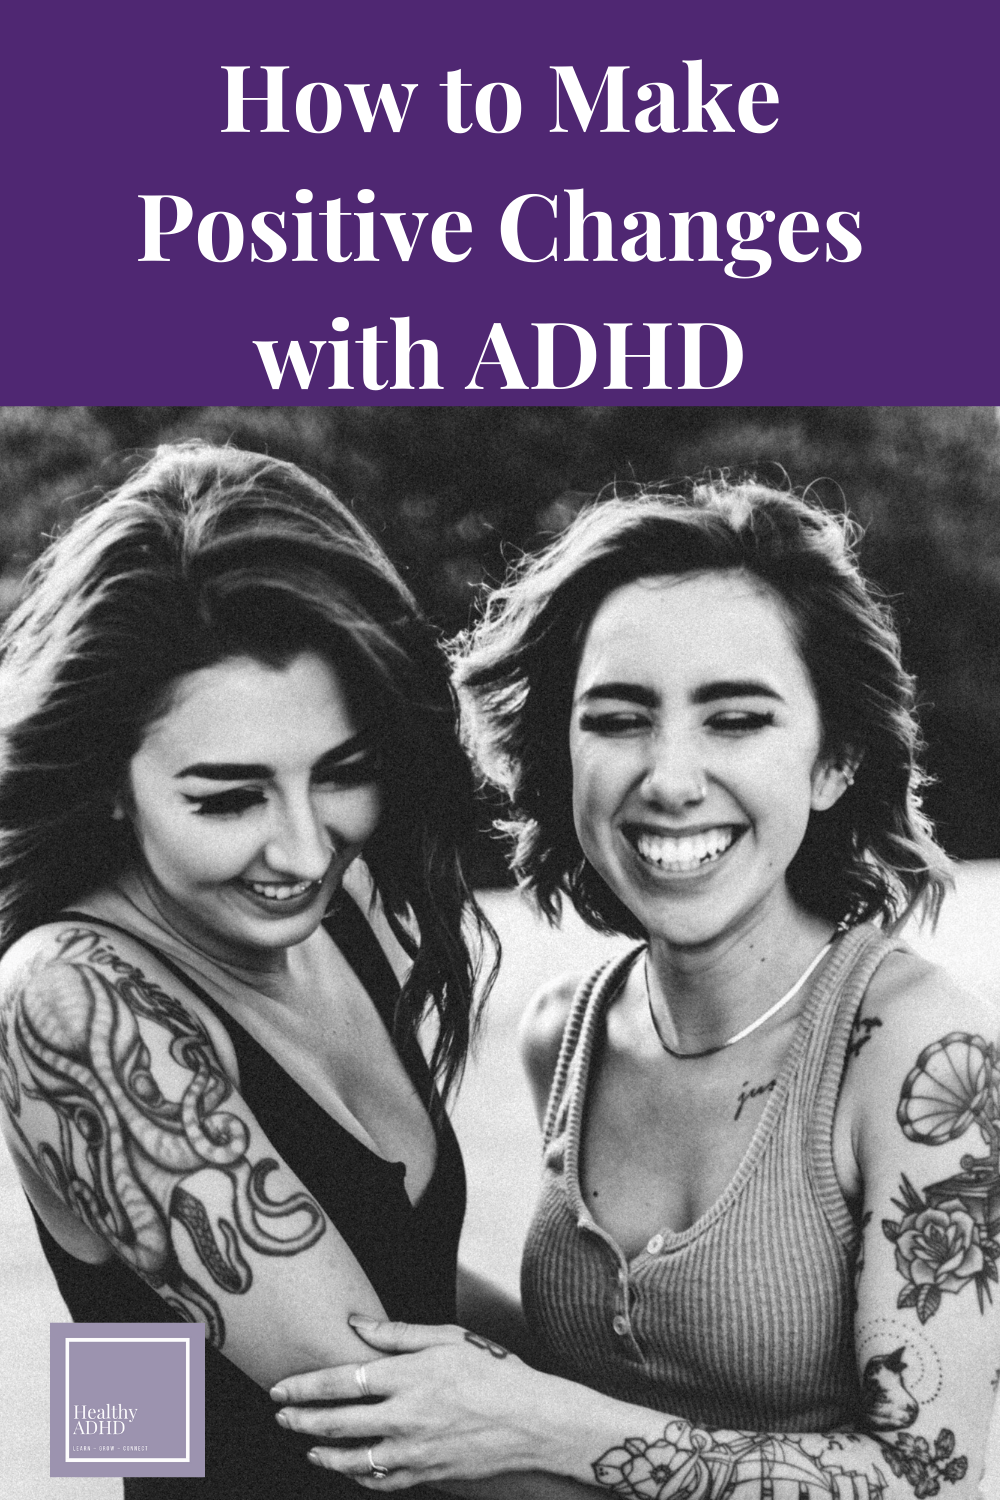 smiling women making positive life changes with ADHD